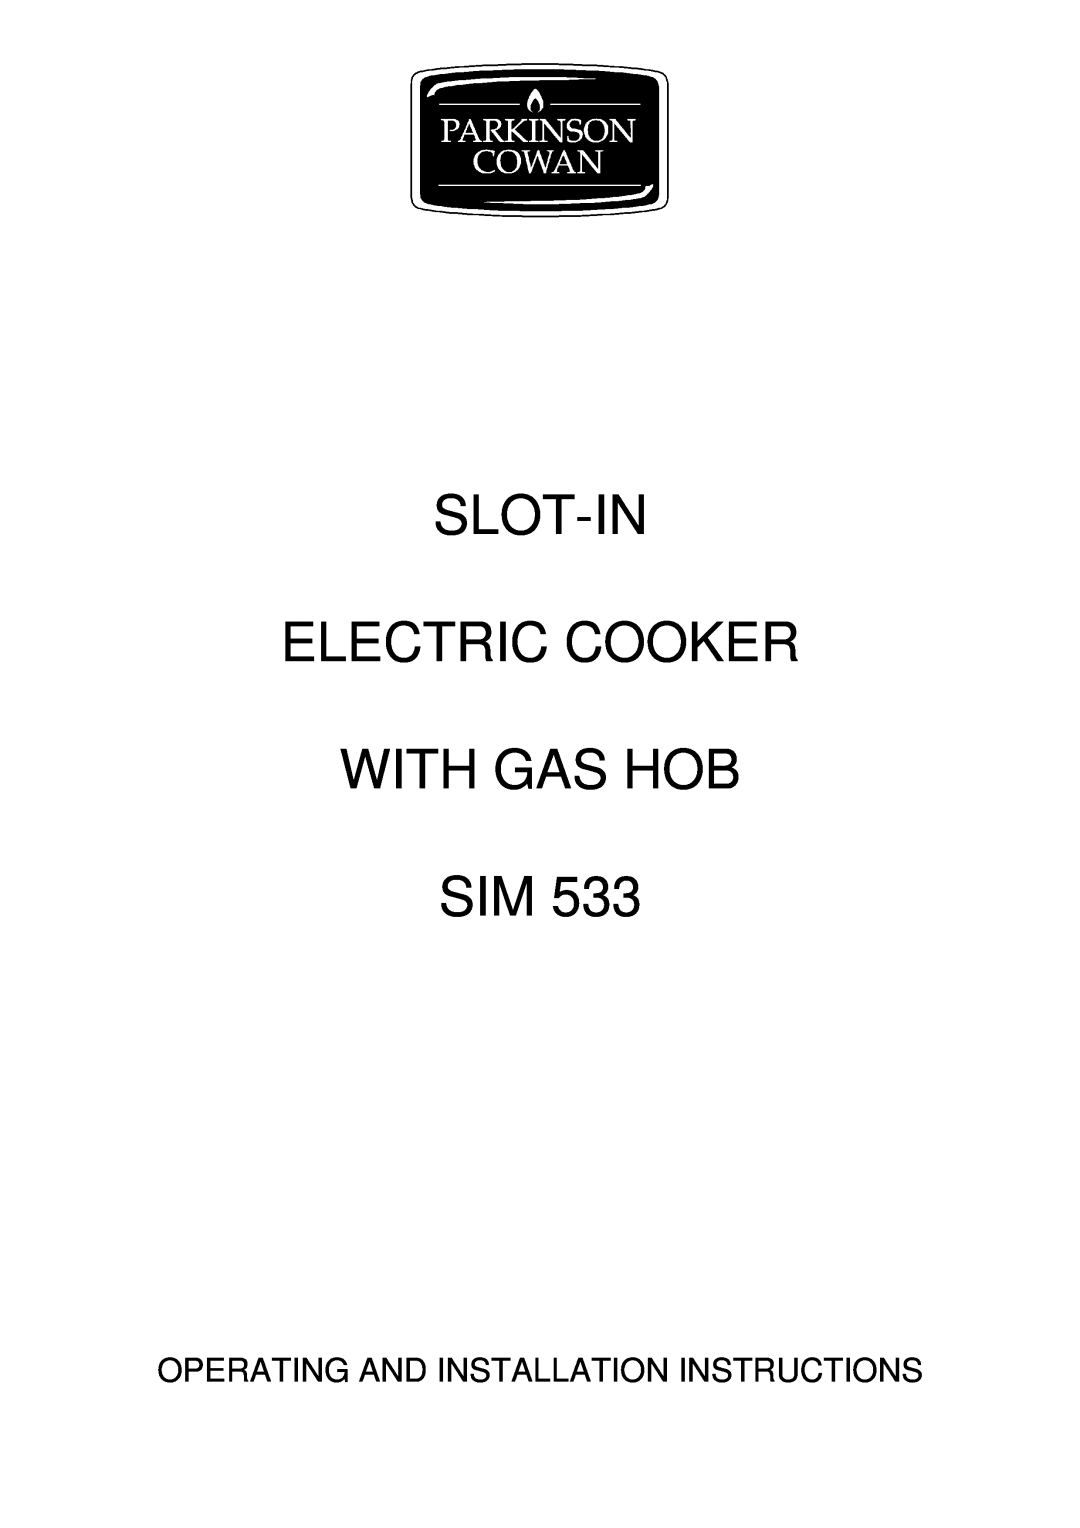 Electrolux SIM 533 installation instructions Slot-In Electric Cooker With Gas Hob Sim 